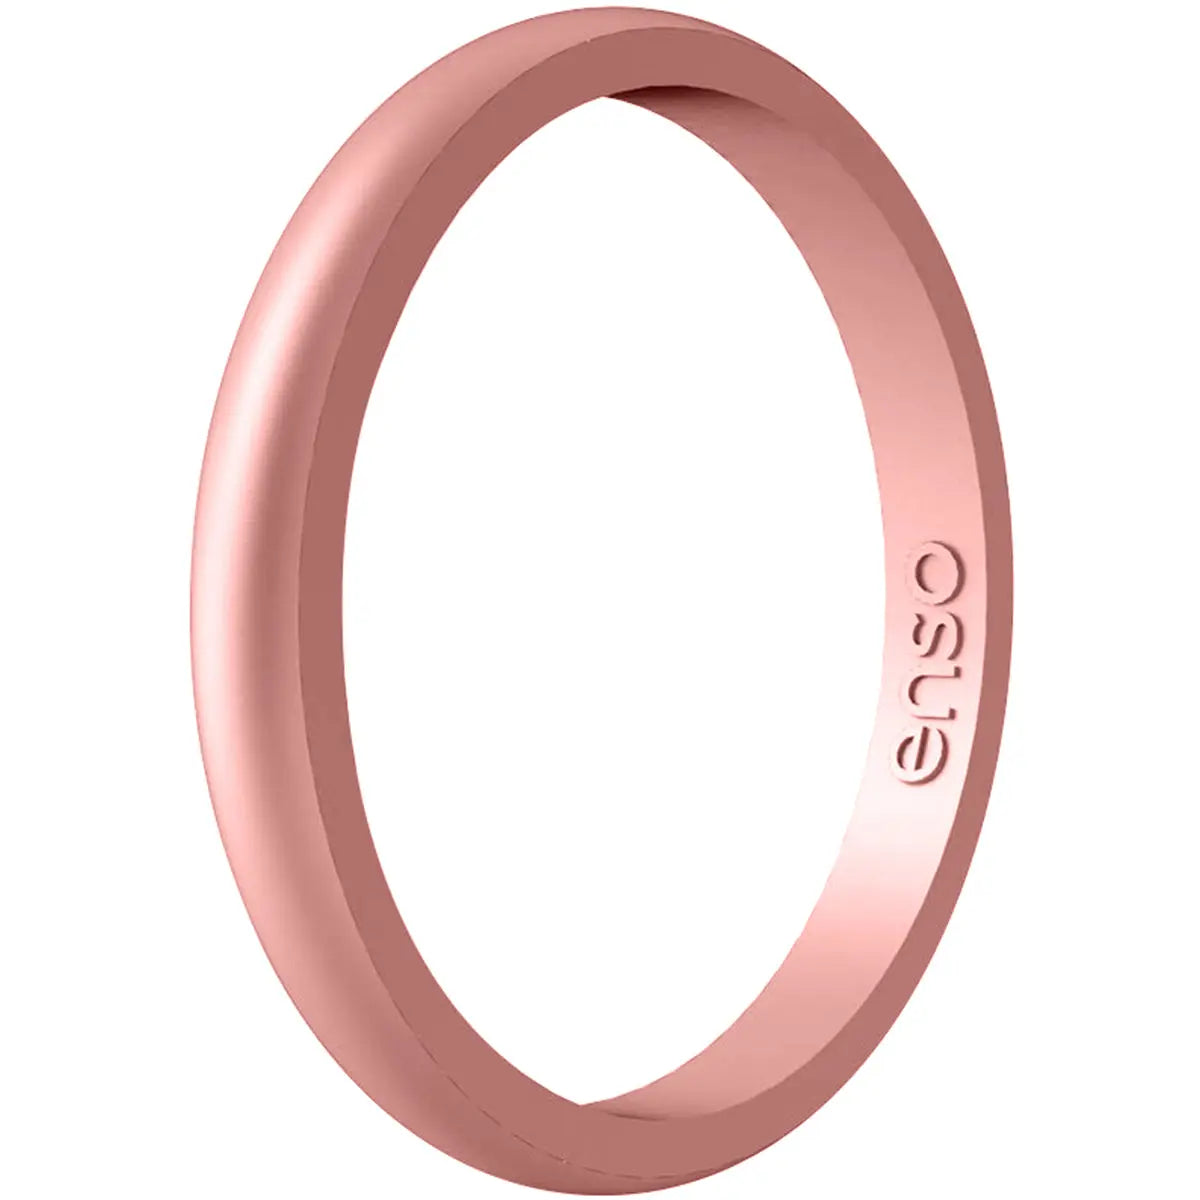 Enso Rings Halo Elements Series Silicone Ring